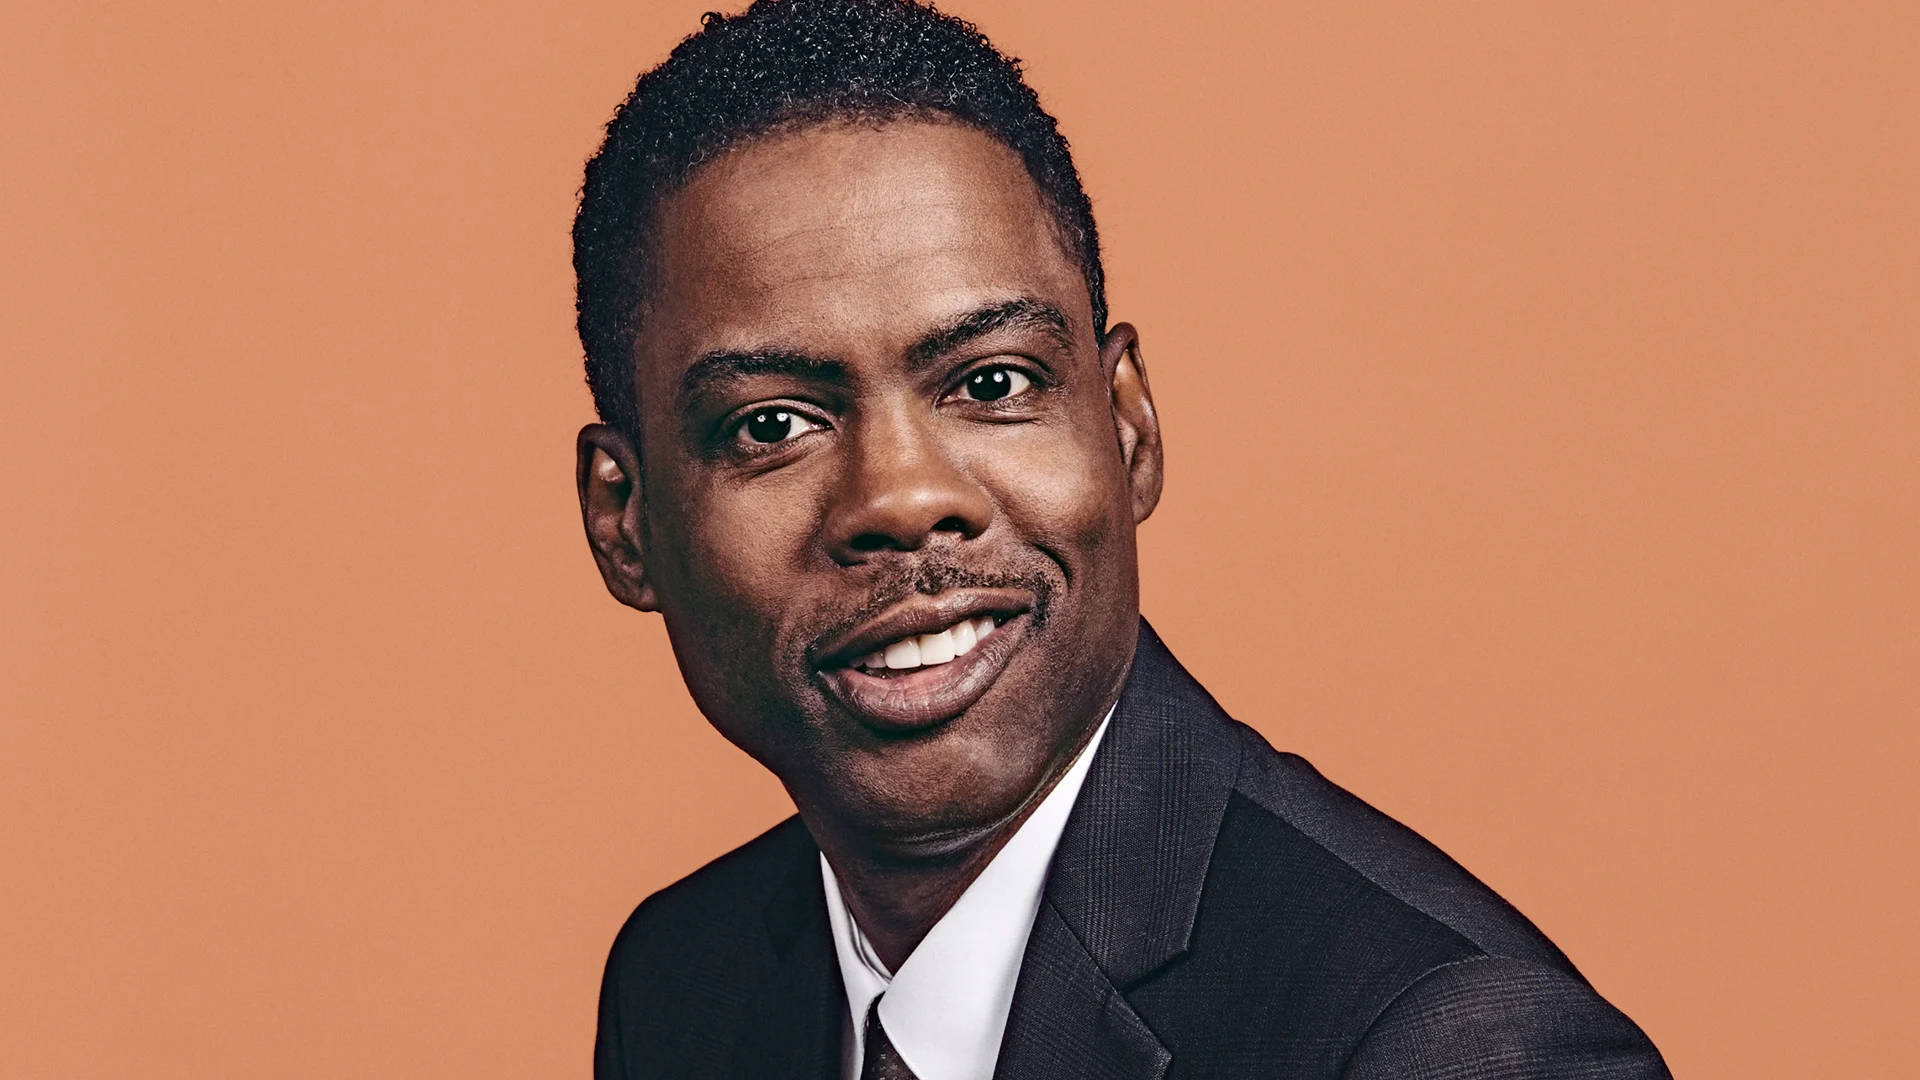 Chris Rock In Thought